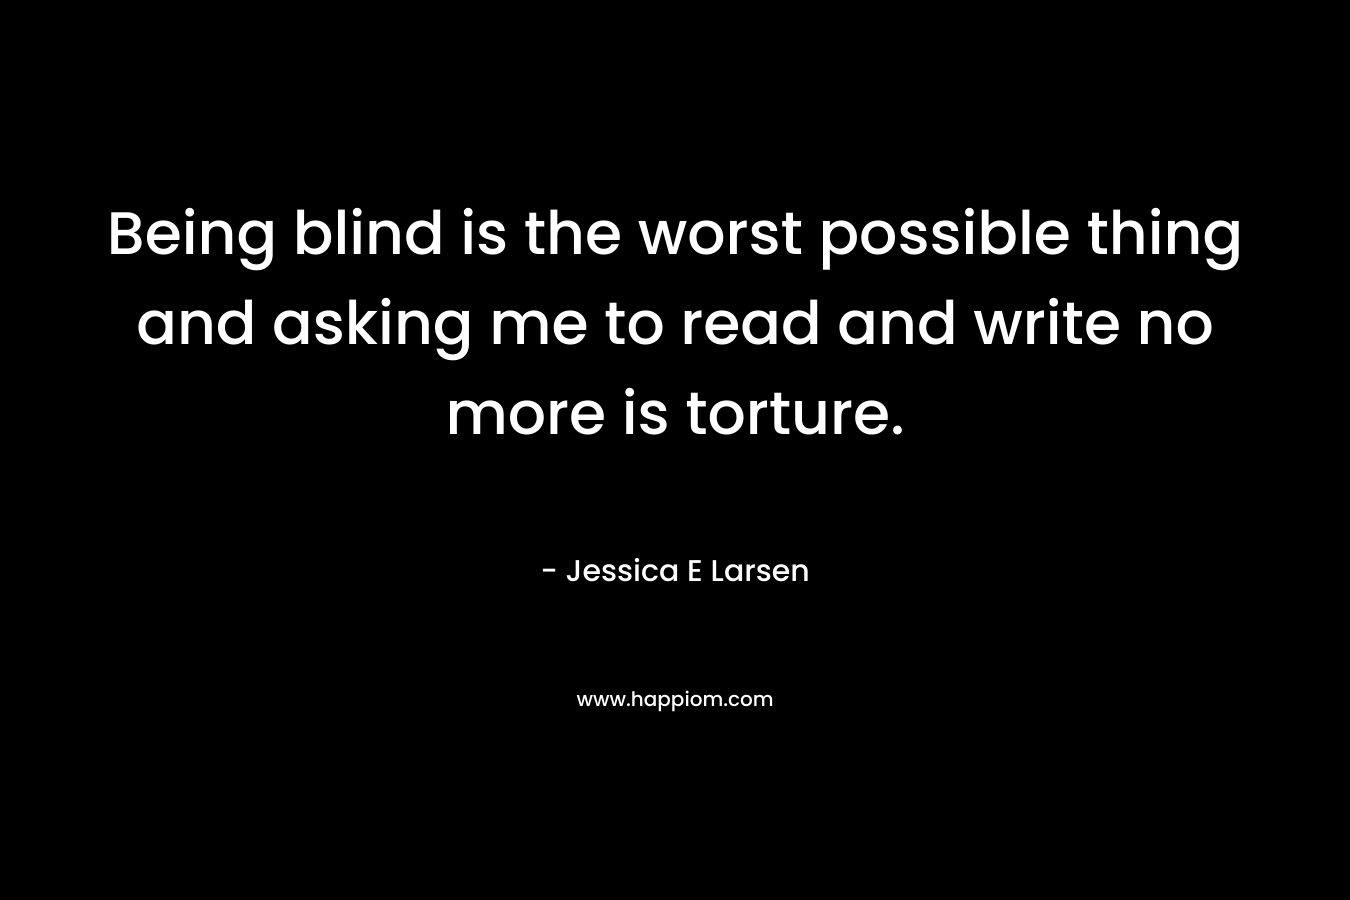 Being blind is the worst possible thing and asking me to read and write no more is torture.